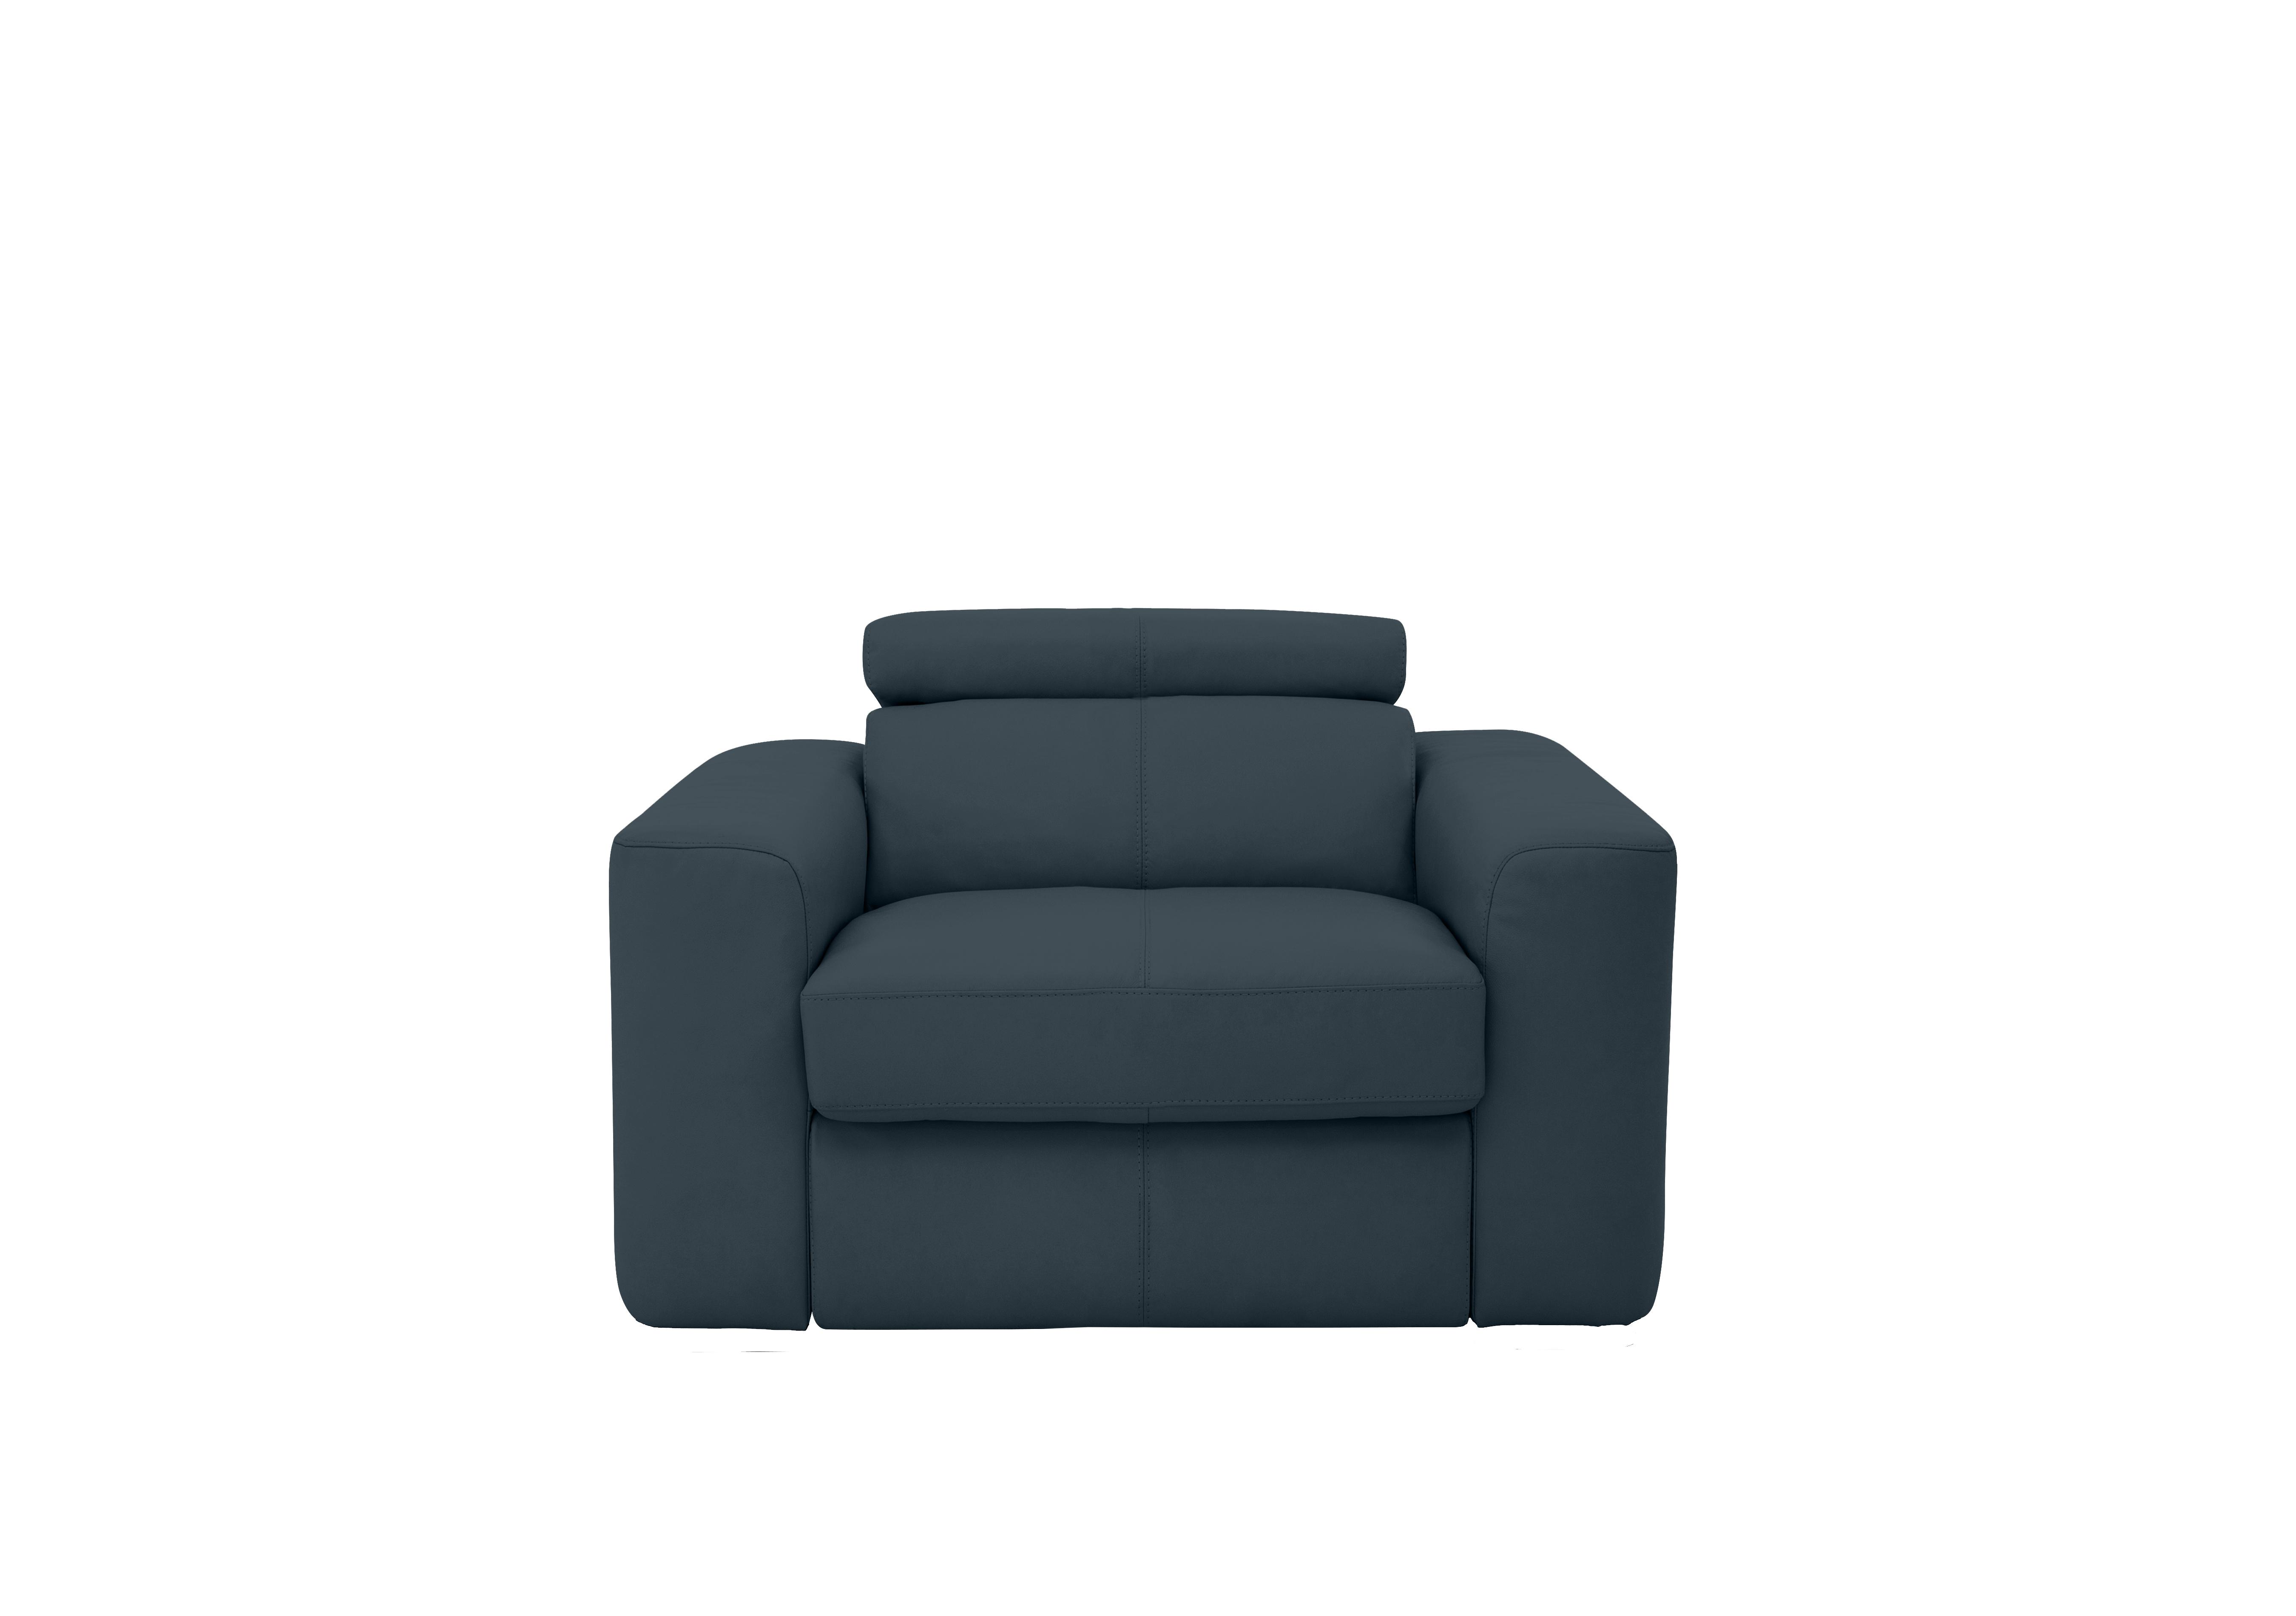 Infinity Leather Armchair in Bv-313e Ocean Blue on Furniture Village